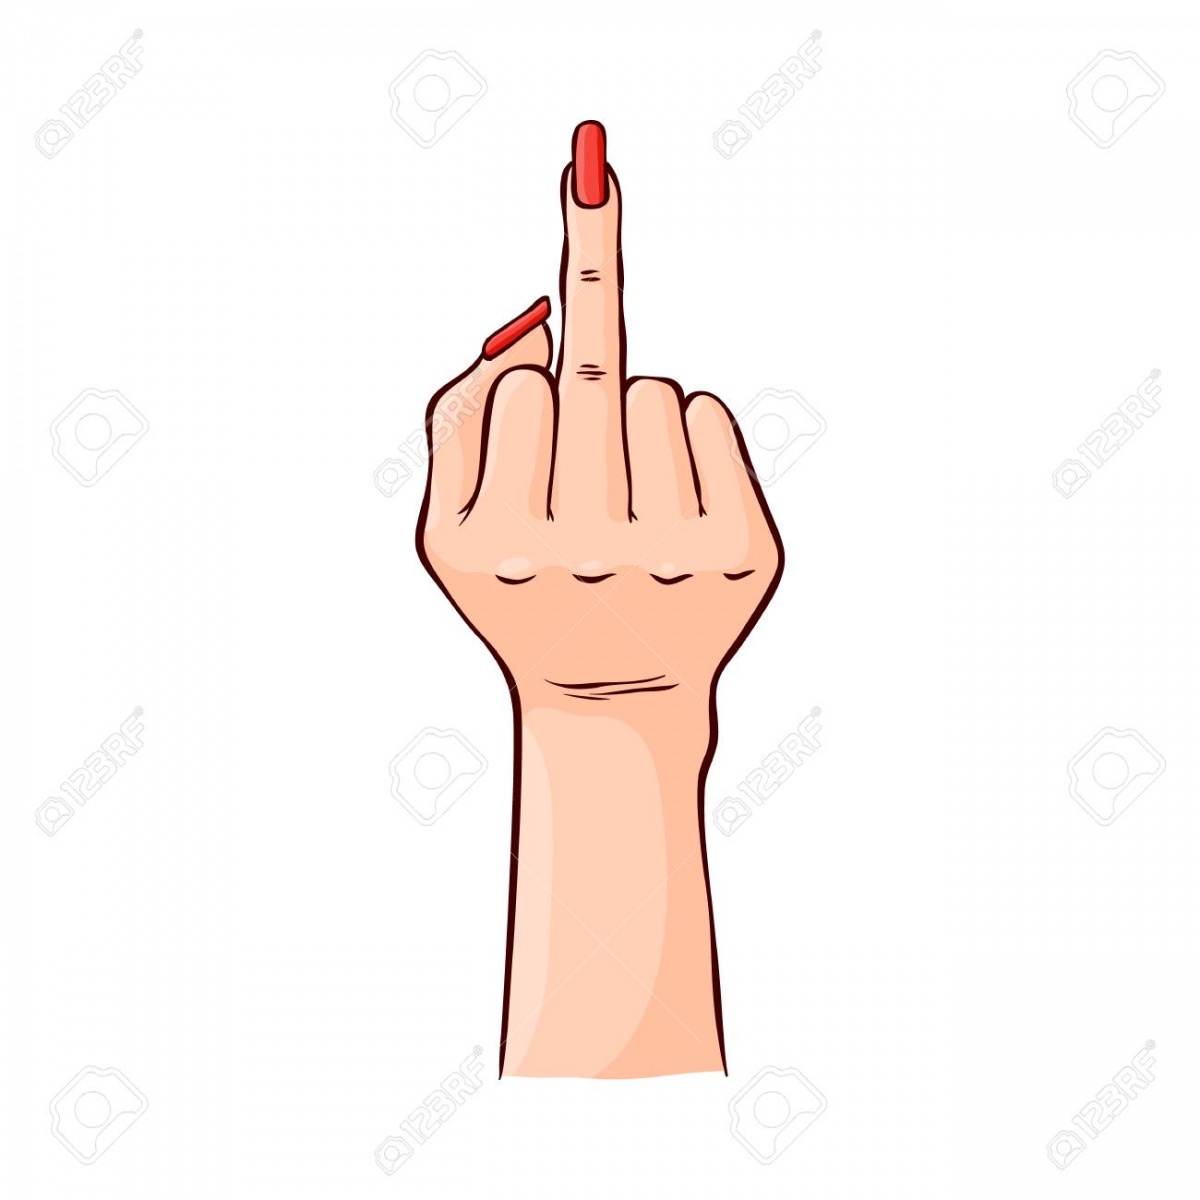 Name:  110946880-vector-illustration-of-female-hand-showing-rude--you-gesture-in-sketch-style-isola.jpg
Views: 106
Size:  136.0 KB